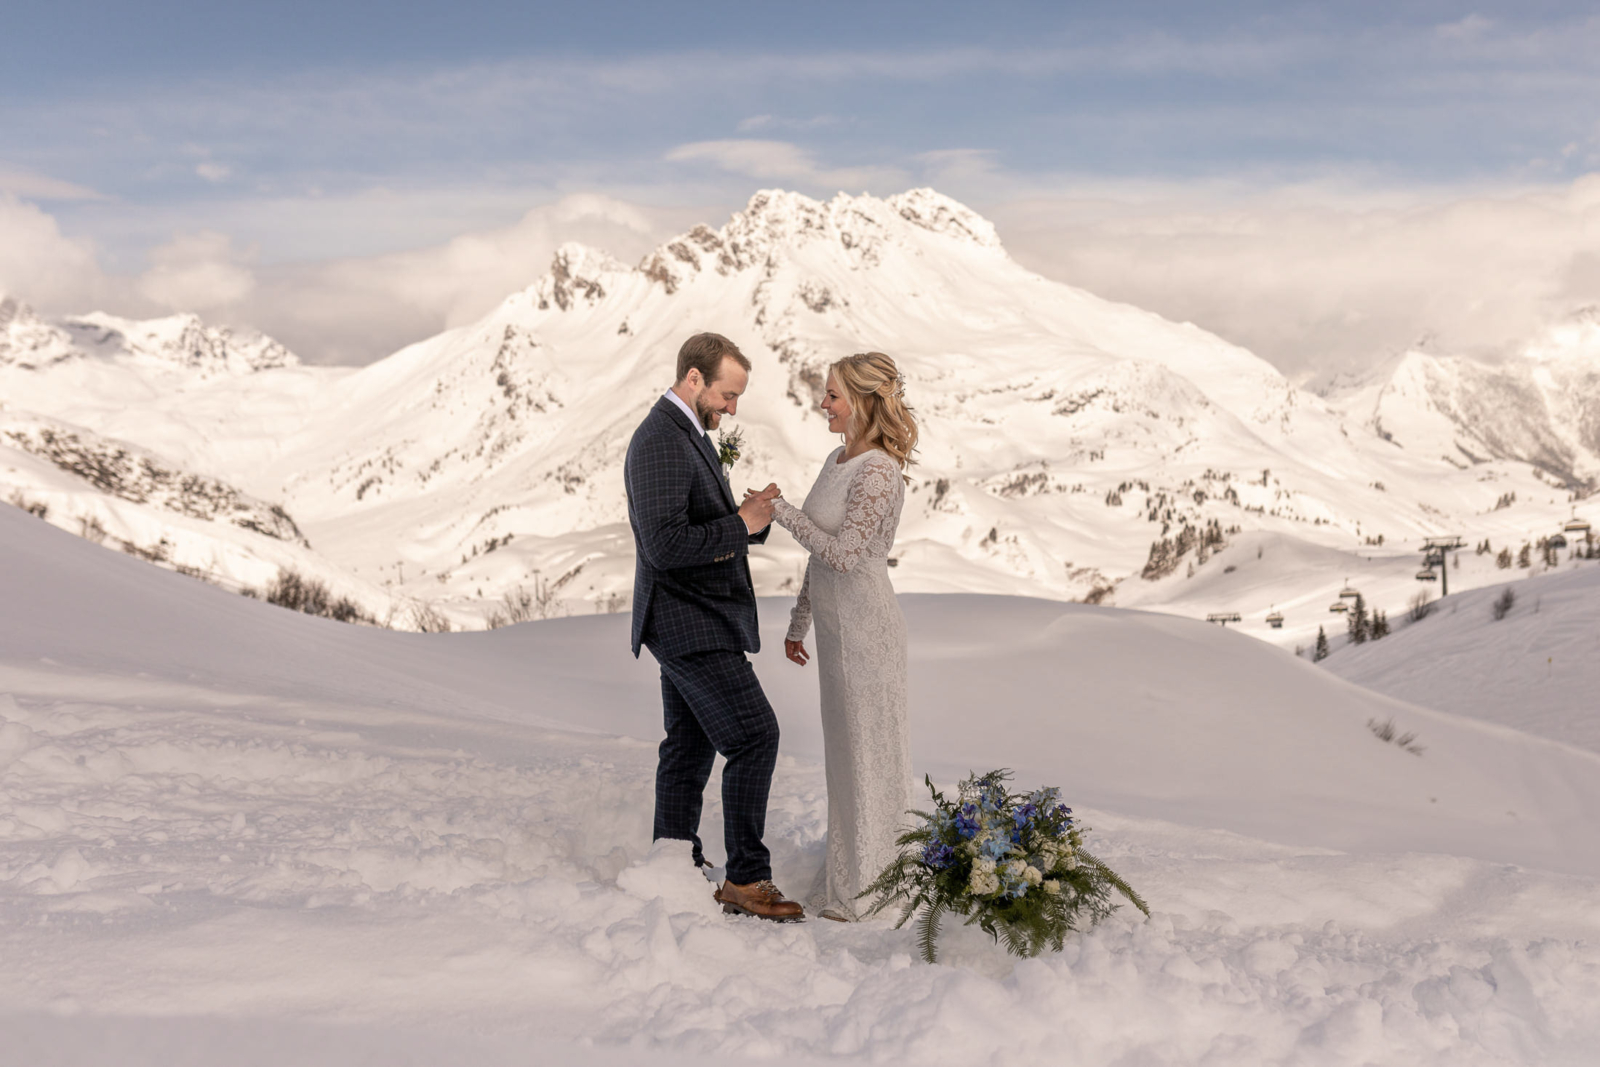 Elopement Ceremony in the Snow